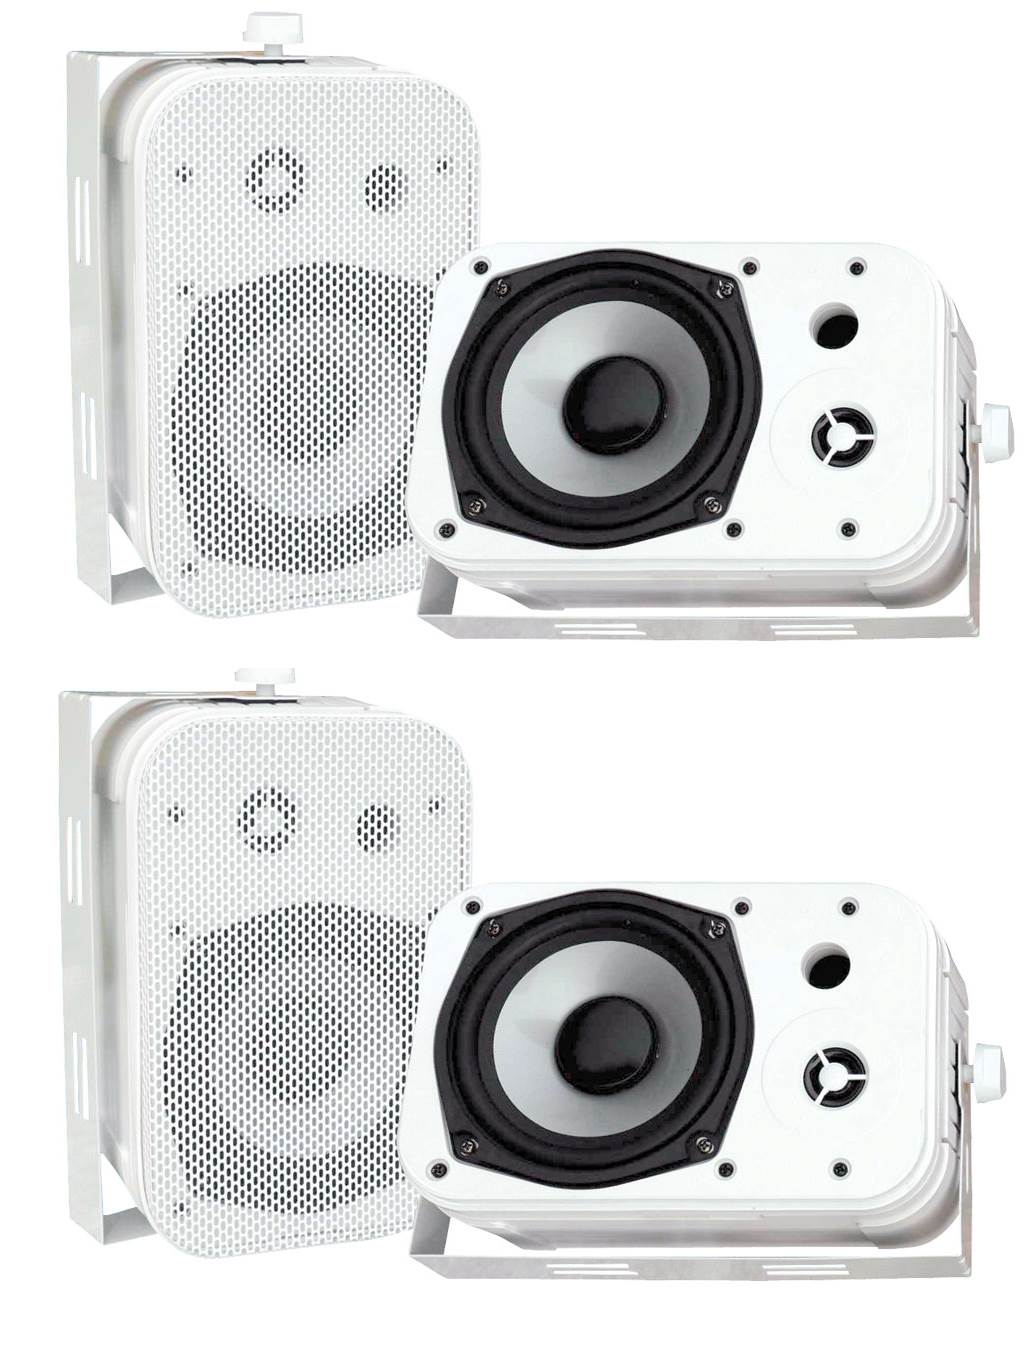 Pyle PDWR40W 5.25" White Indoor/Outdoor Waterproof Home Theater Speakers, 2 Pair - image 1 of 6